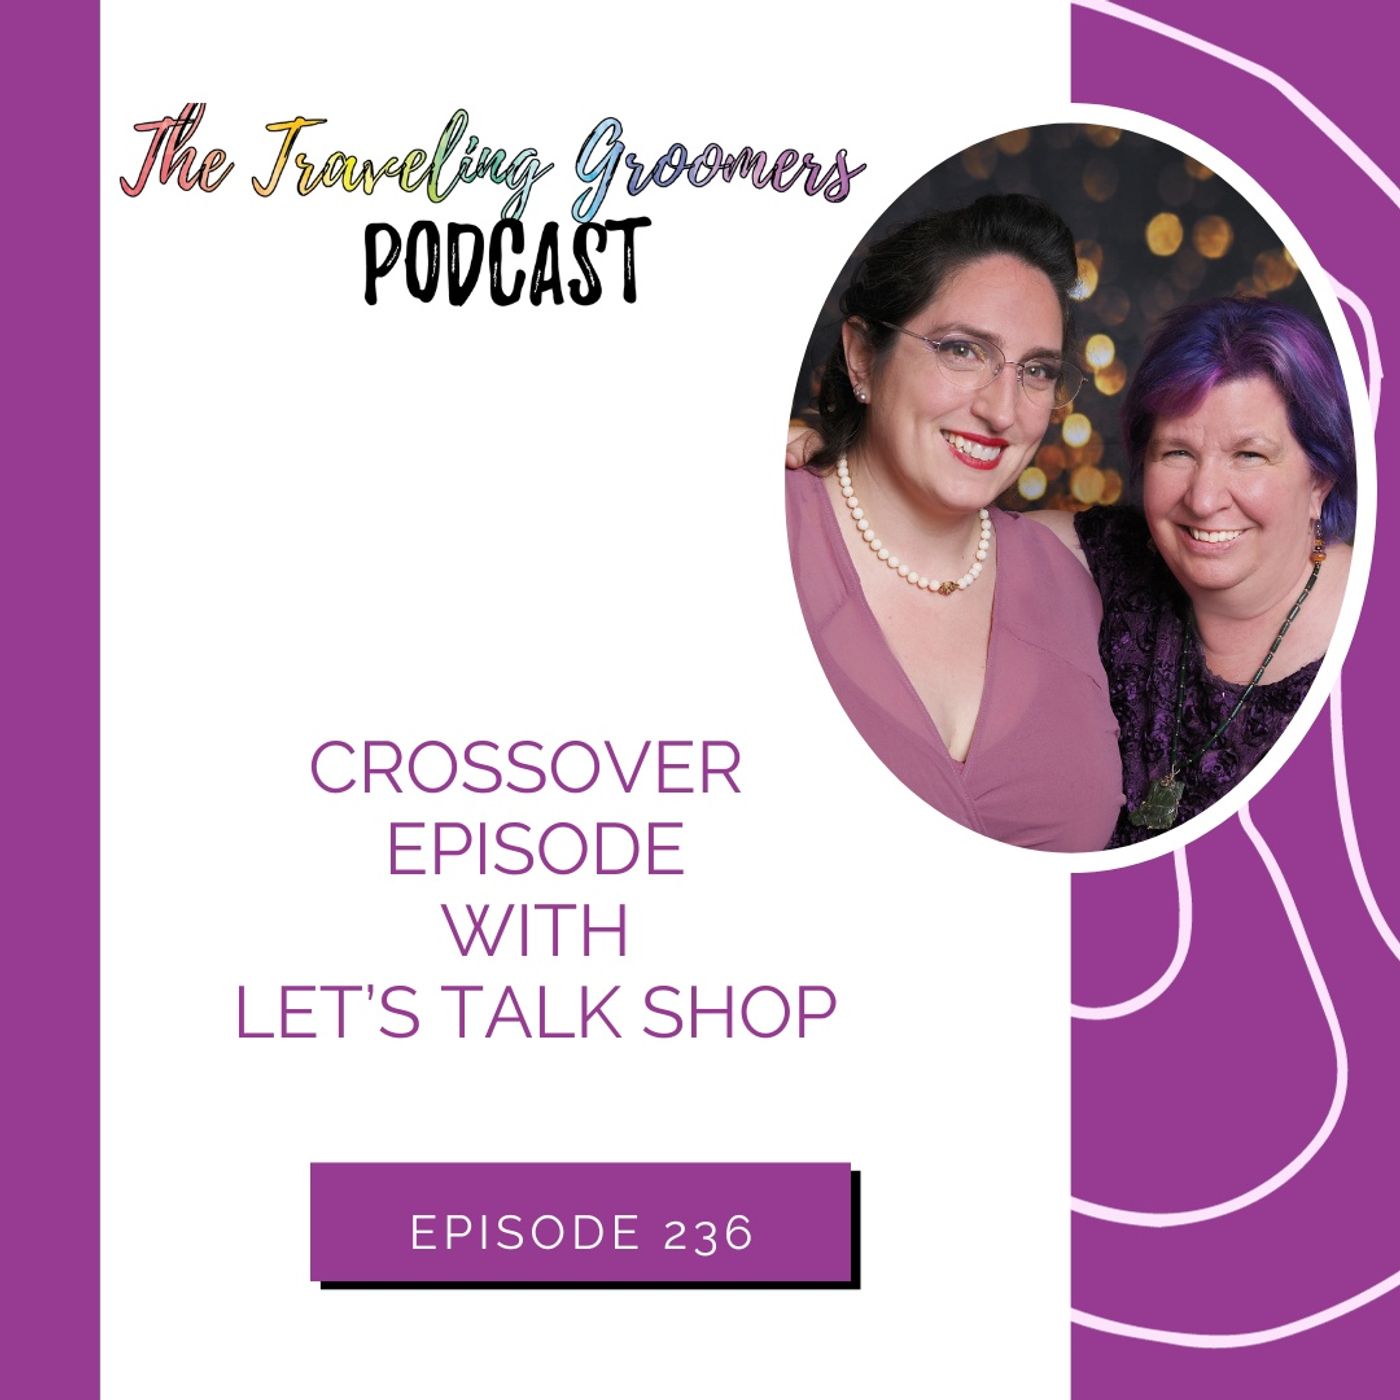 Crossover Episode With Let's Talk Shop